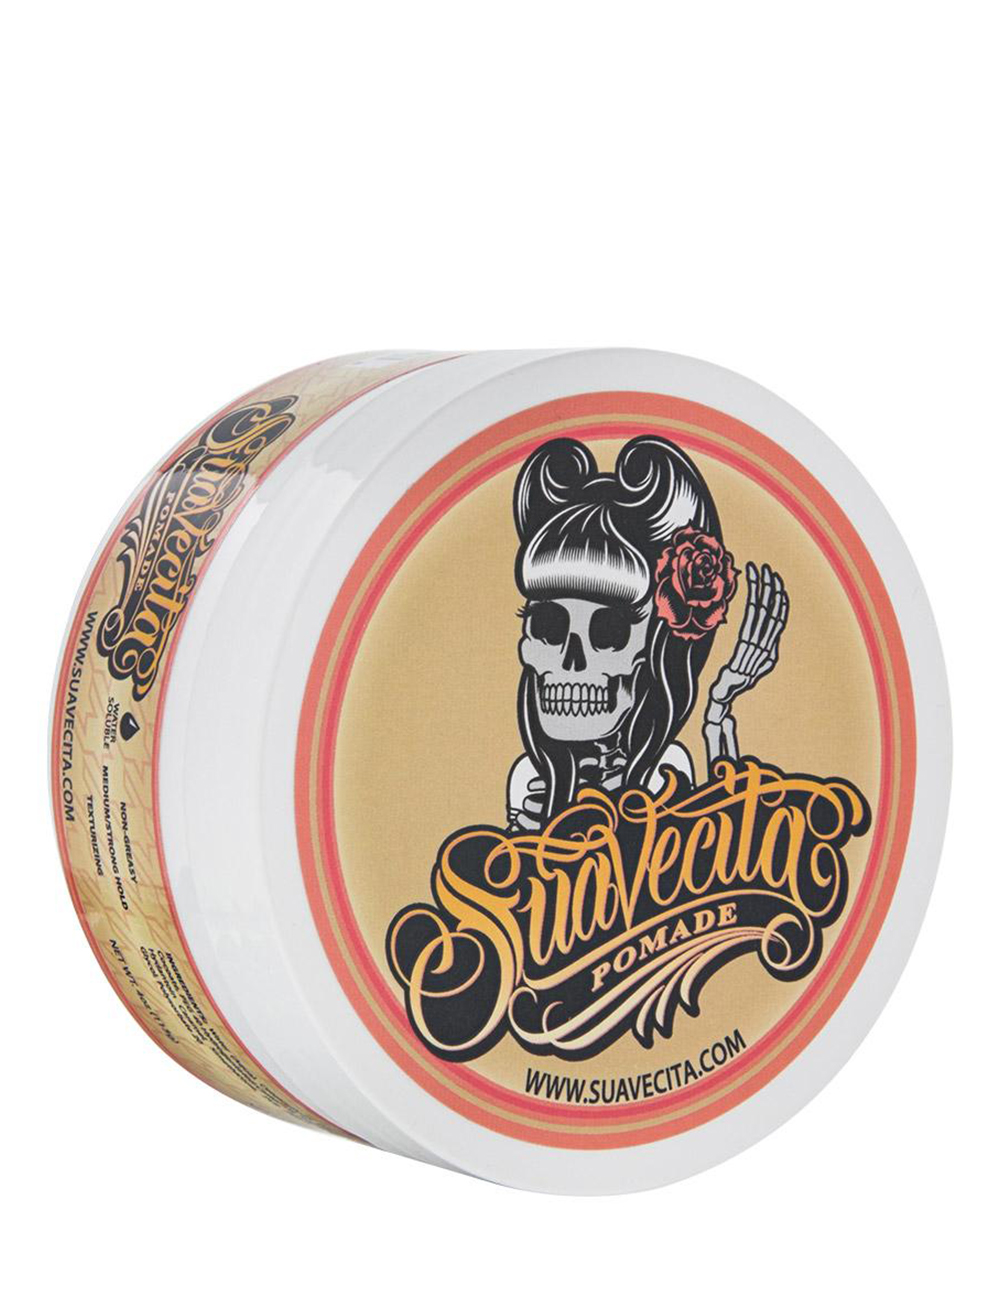 Suavecita Hair Pomade 4oz - Hair Styling Products - Slick Styles